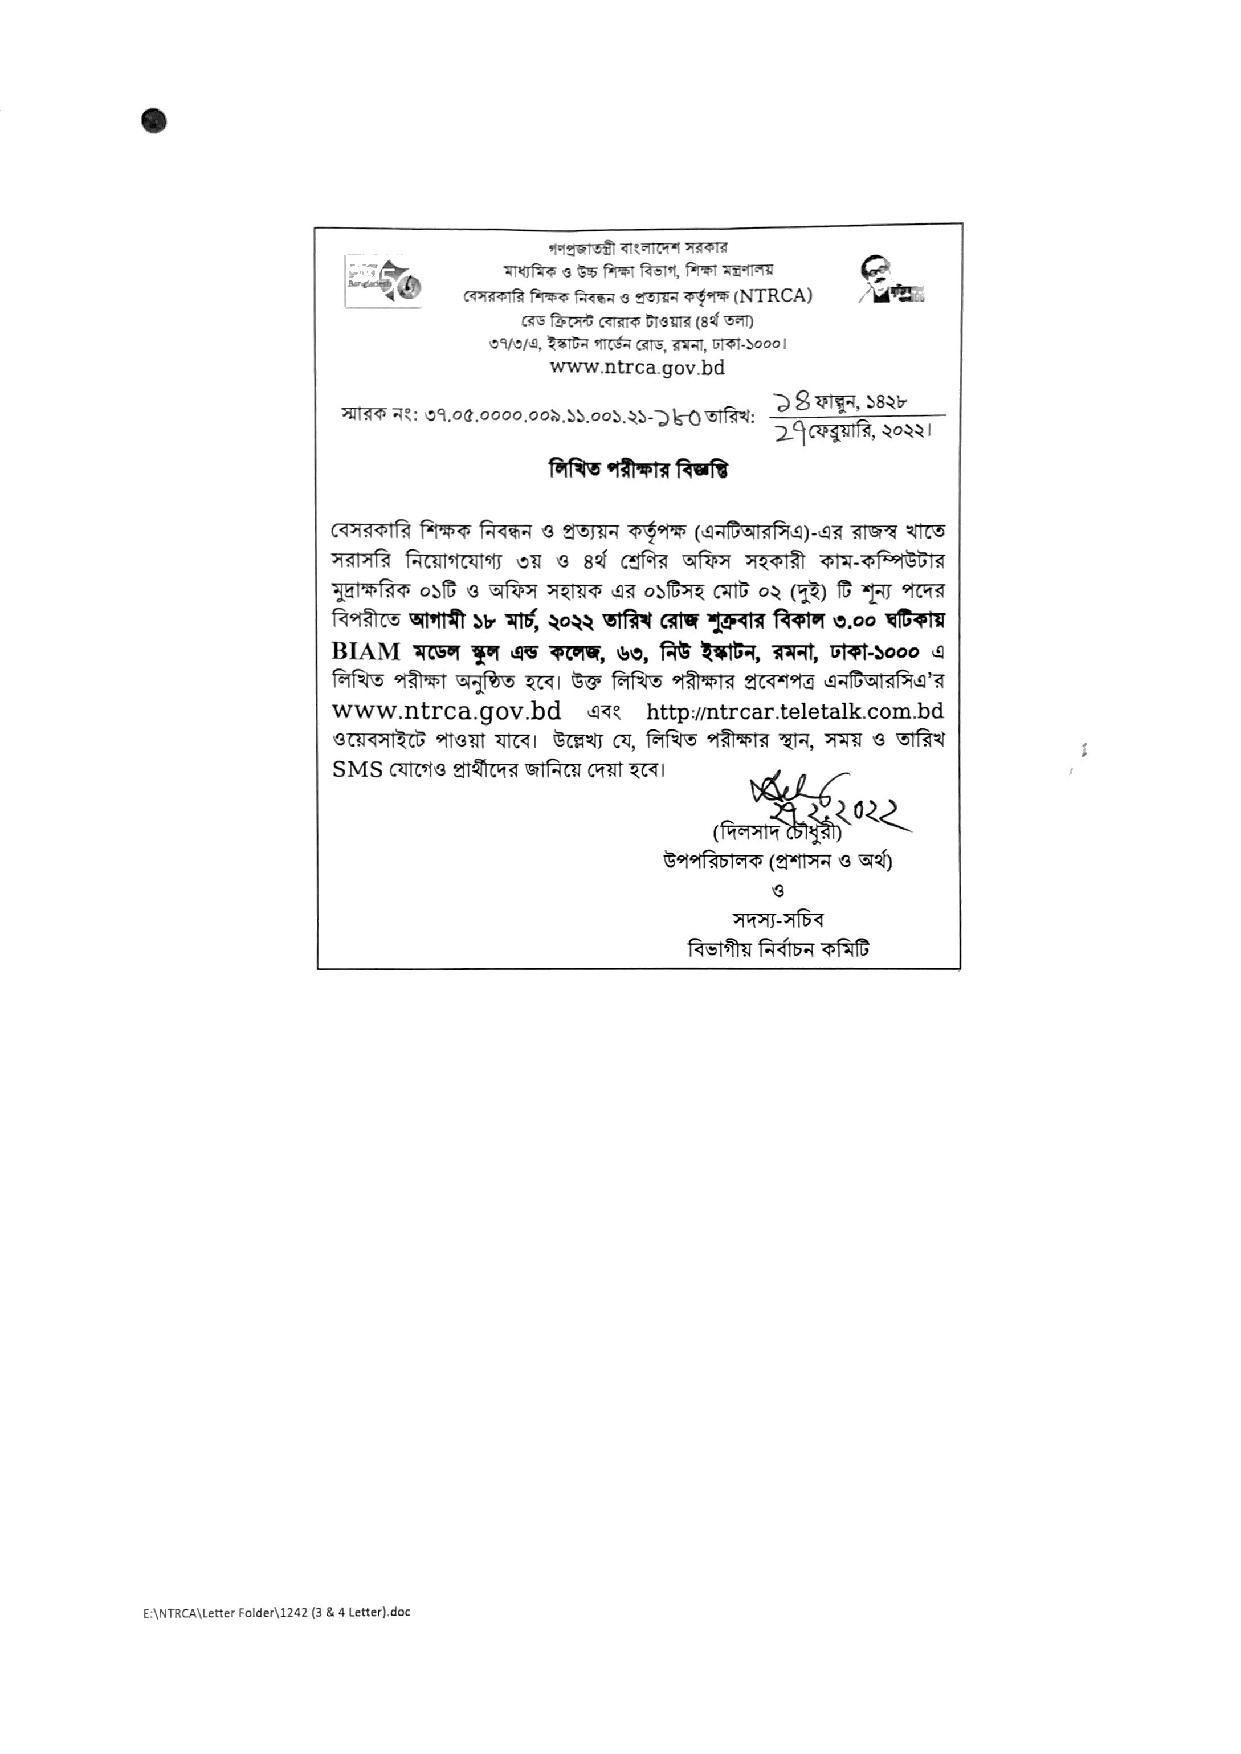 NTRCA Exam Date published